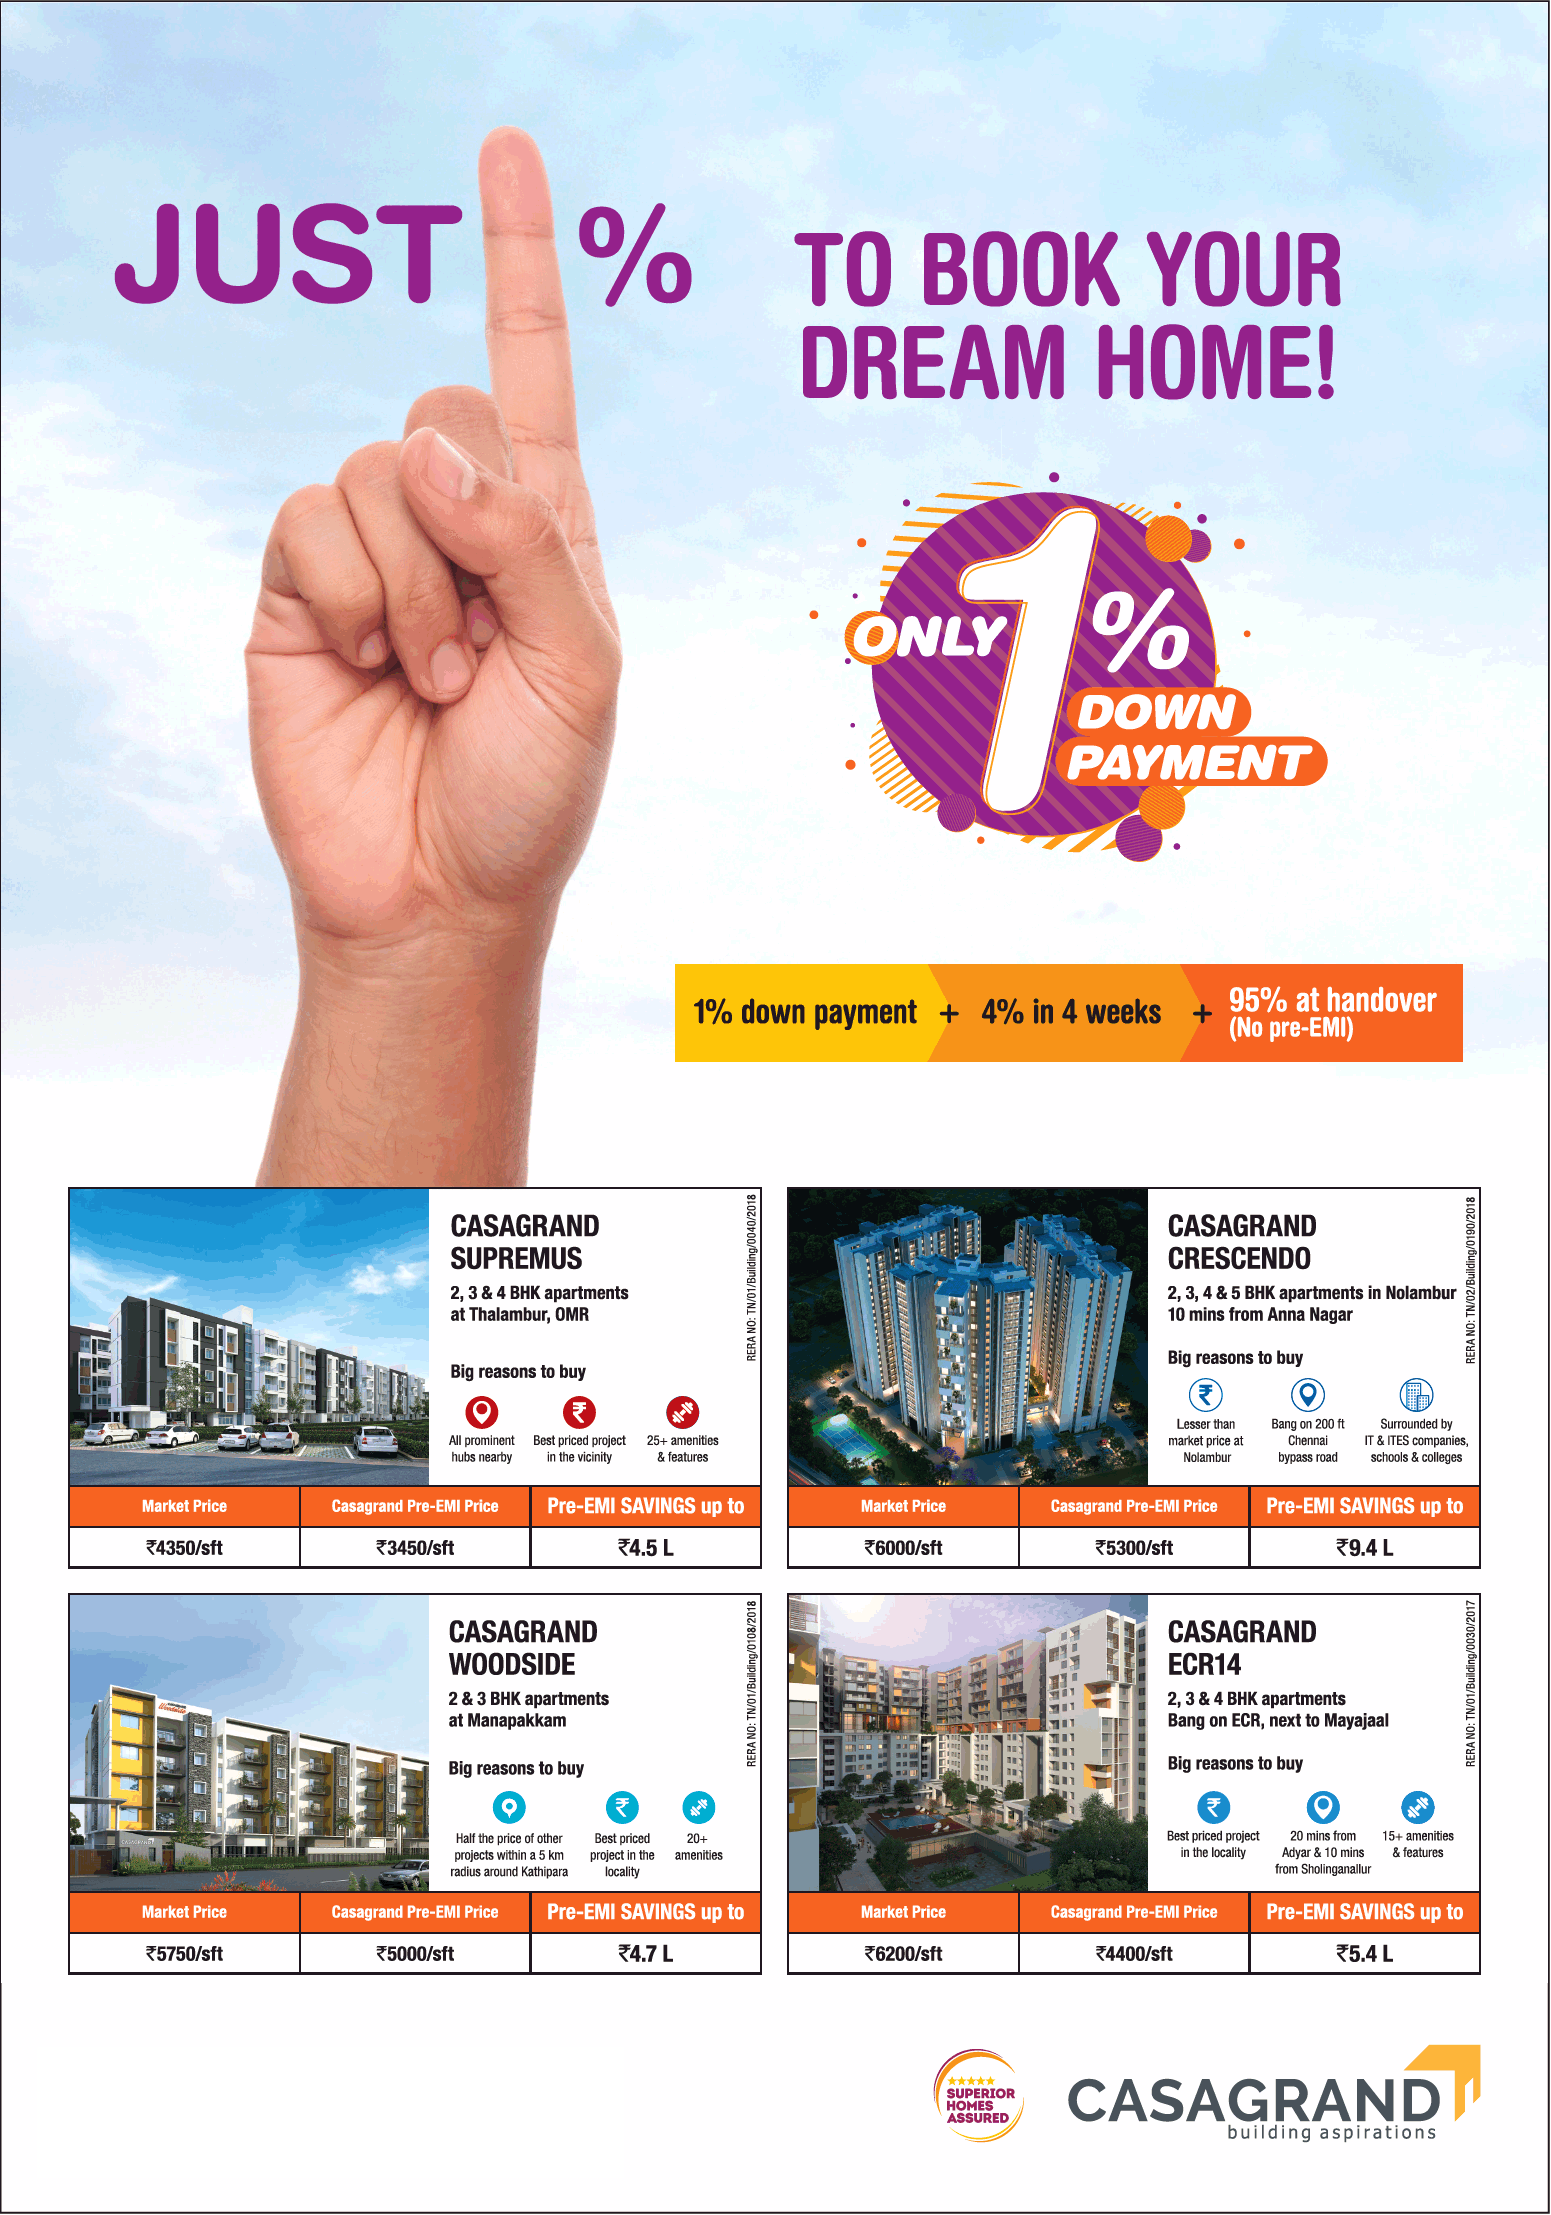 Pay just 1% to book your dream home at Casagrand Projects in Chennai Update